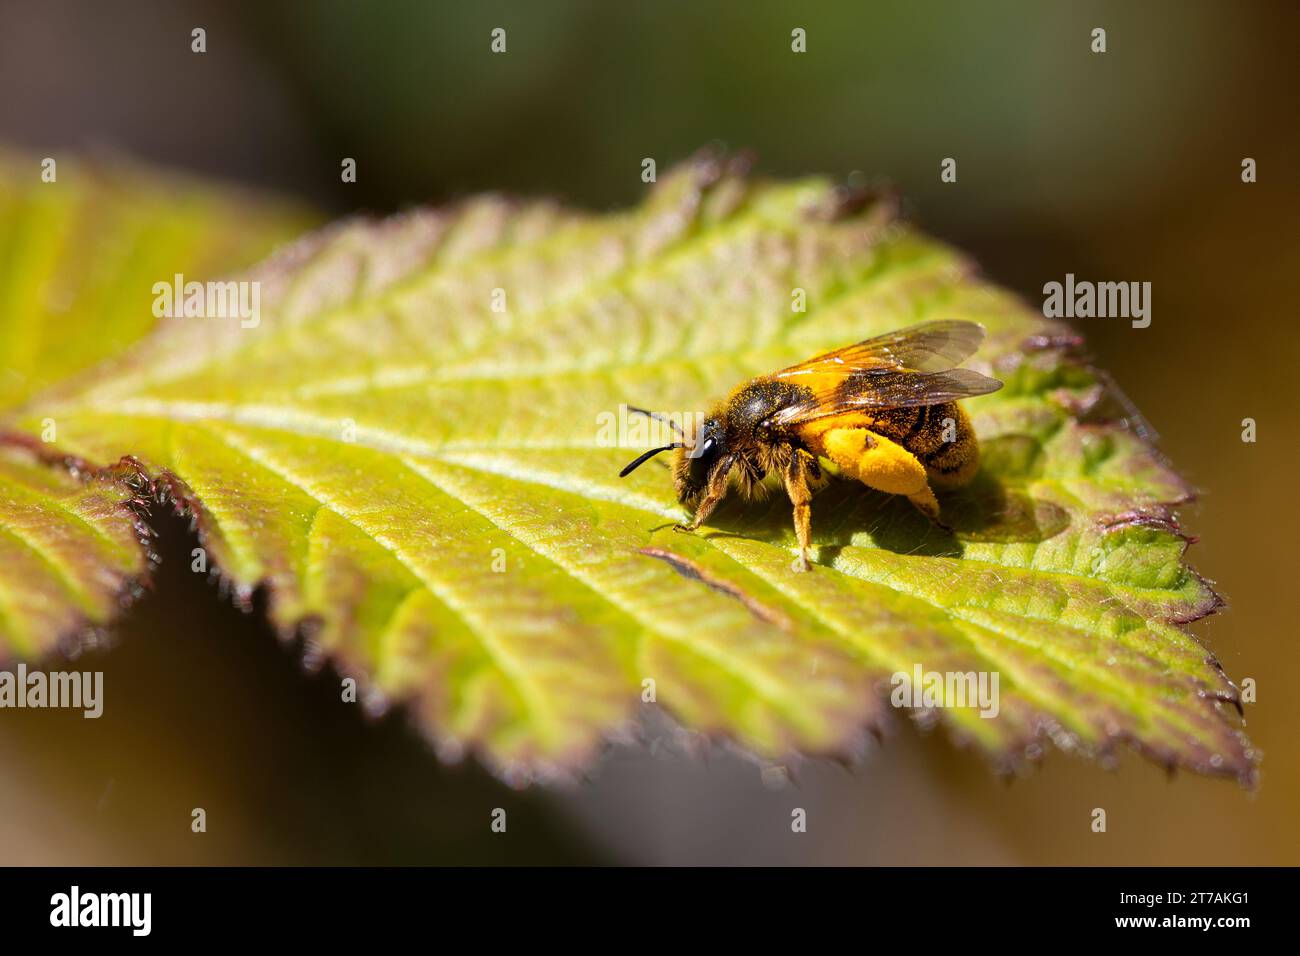 bee perched on the leaf of a bush smeared with pollen. horizontal macro nature photograph of pollinating animals. Copy Space. Stock Photo